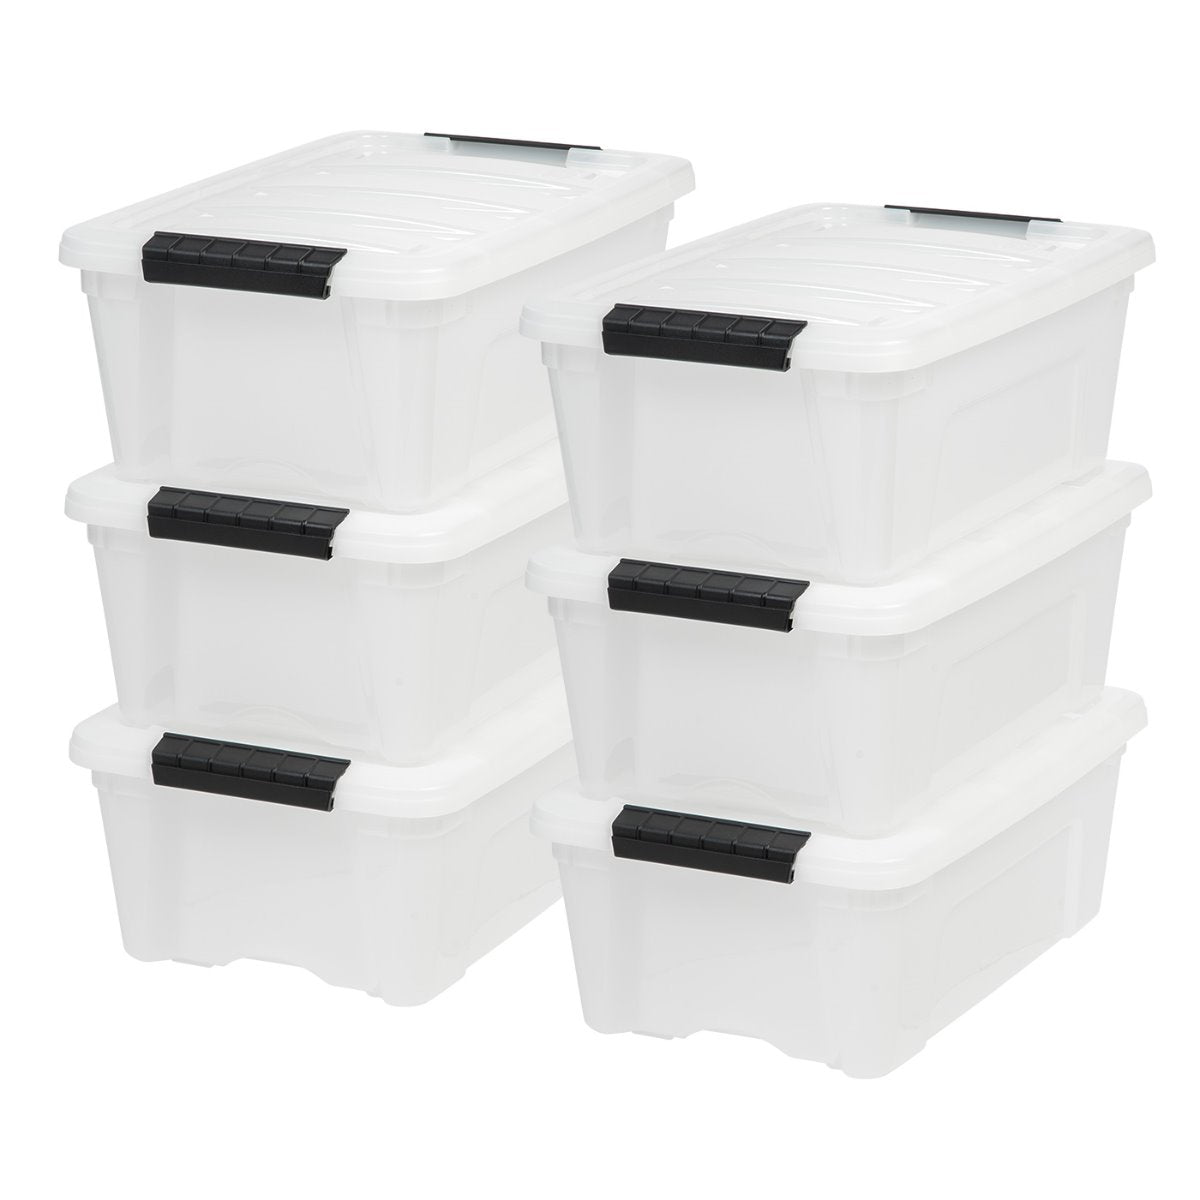  IRIS USA 26.95 Quart Stackable Plastic Storage Bins with Lids  and Latching Buckles, 6 Pack - Pearl, Containers with Lids and Latches,  Durable Nestable Closet, Garage, Totes, Tubs Boxes Organizing : Everything  Else